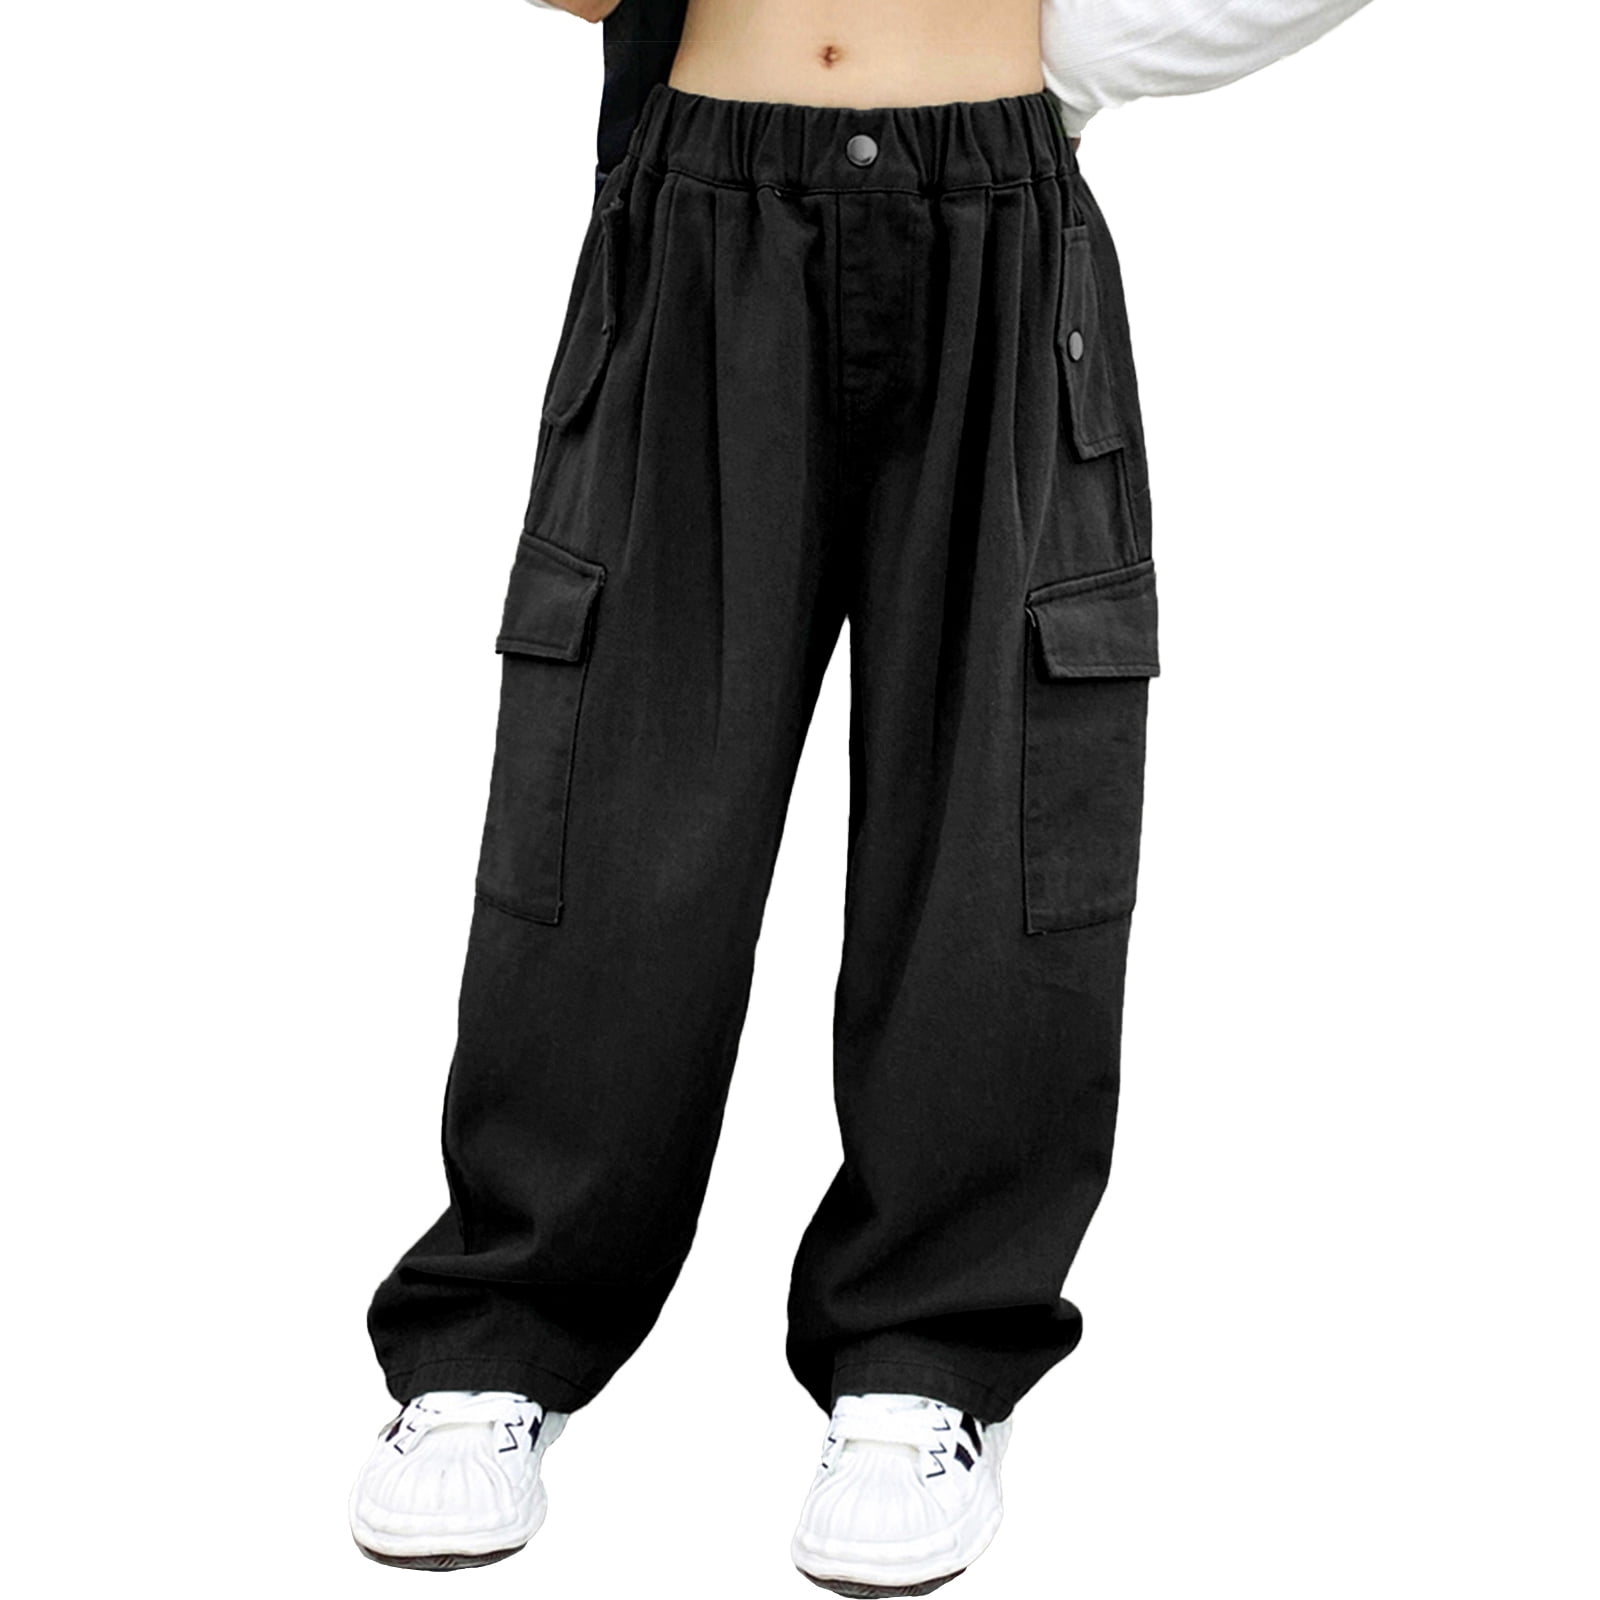 Boy leather jazz dance pants for kids white black tight stage performance  fashion singers dancers professional long trousers